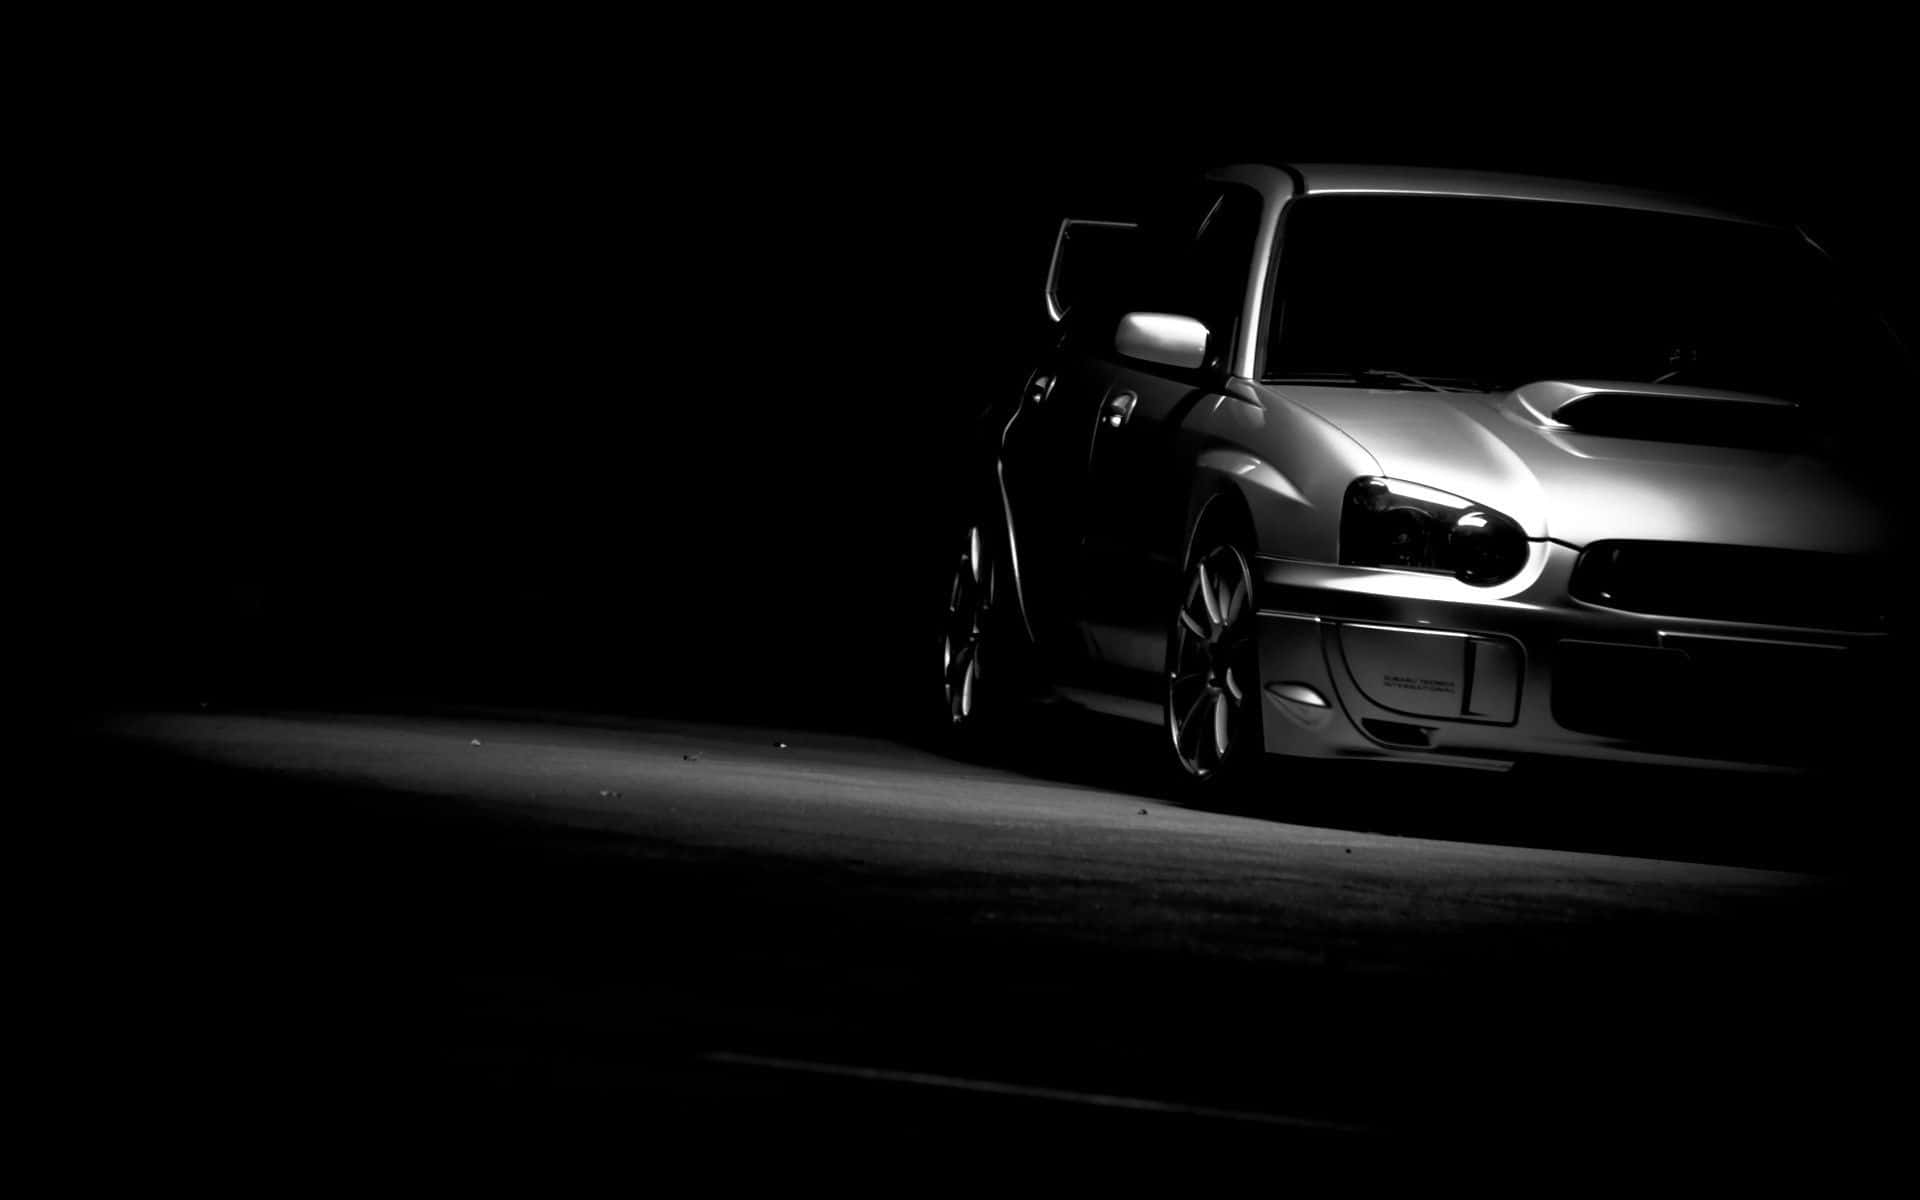 Sleek Black and White Car on the Road Wallpaper